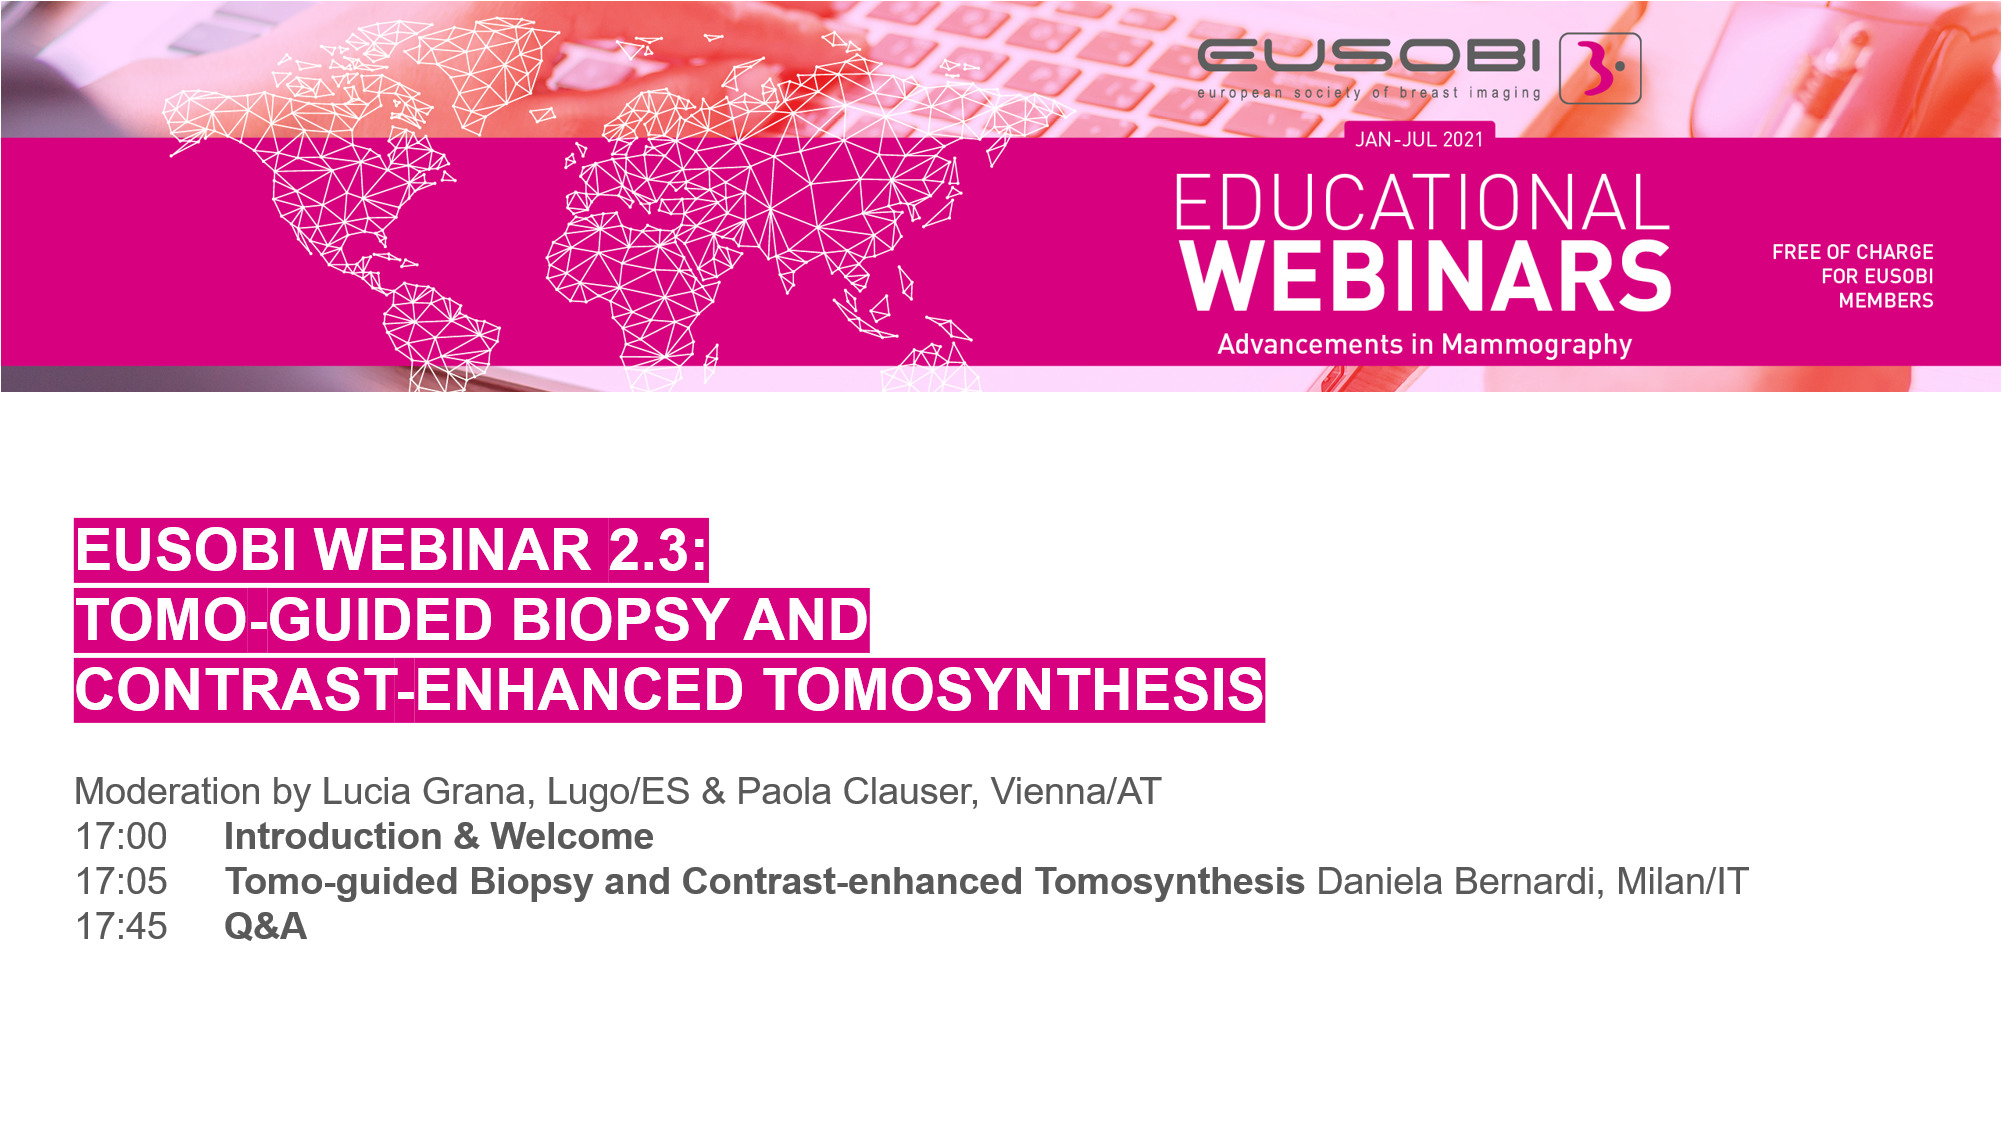 2.3 / Tomo-guided biopsy and Contrast-enhanced Tomosynthesis